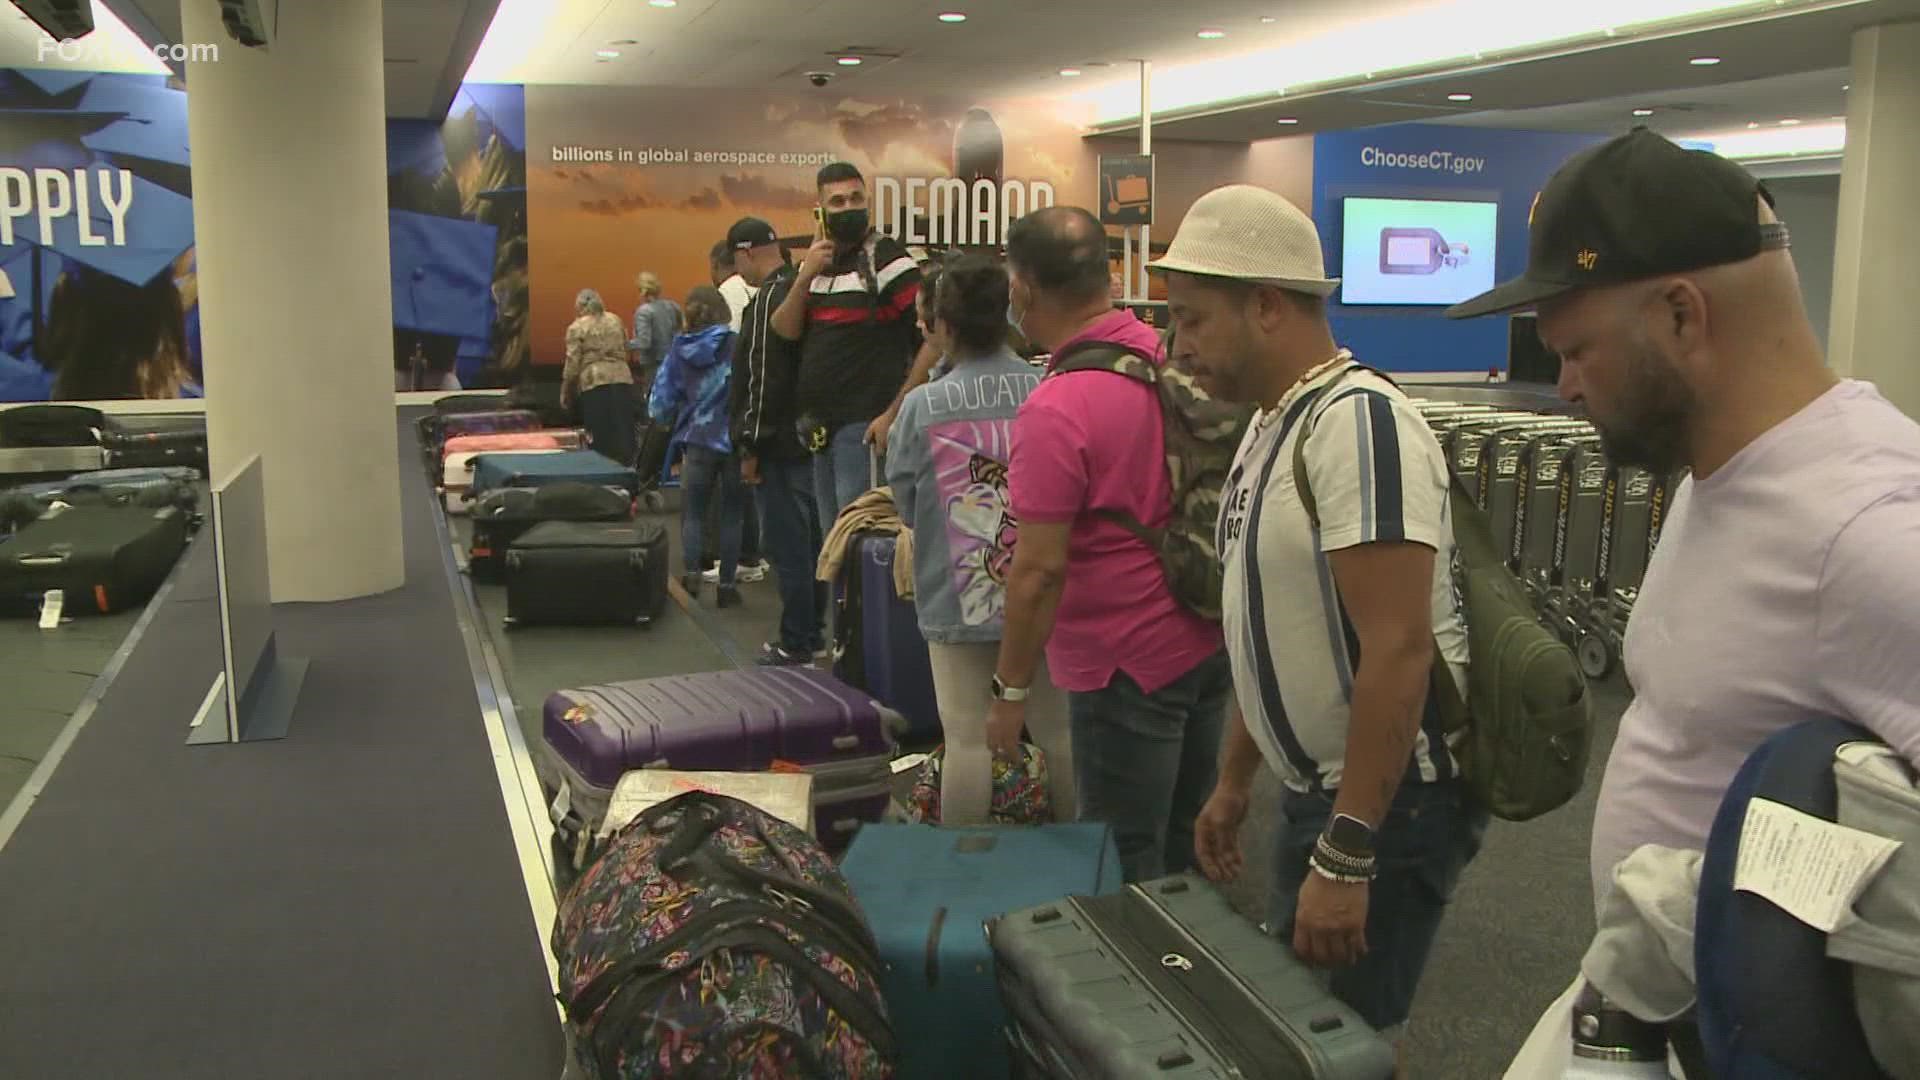 Dozens of people landed at Bradley International Airport Monday evening after departing from Puerto Rico, which is now recovering from Hurricane Fiona.